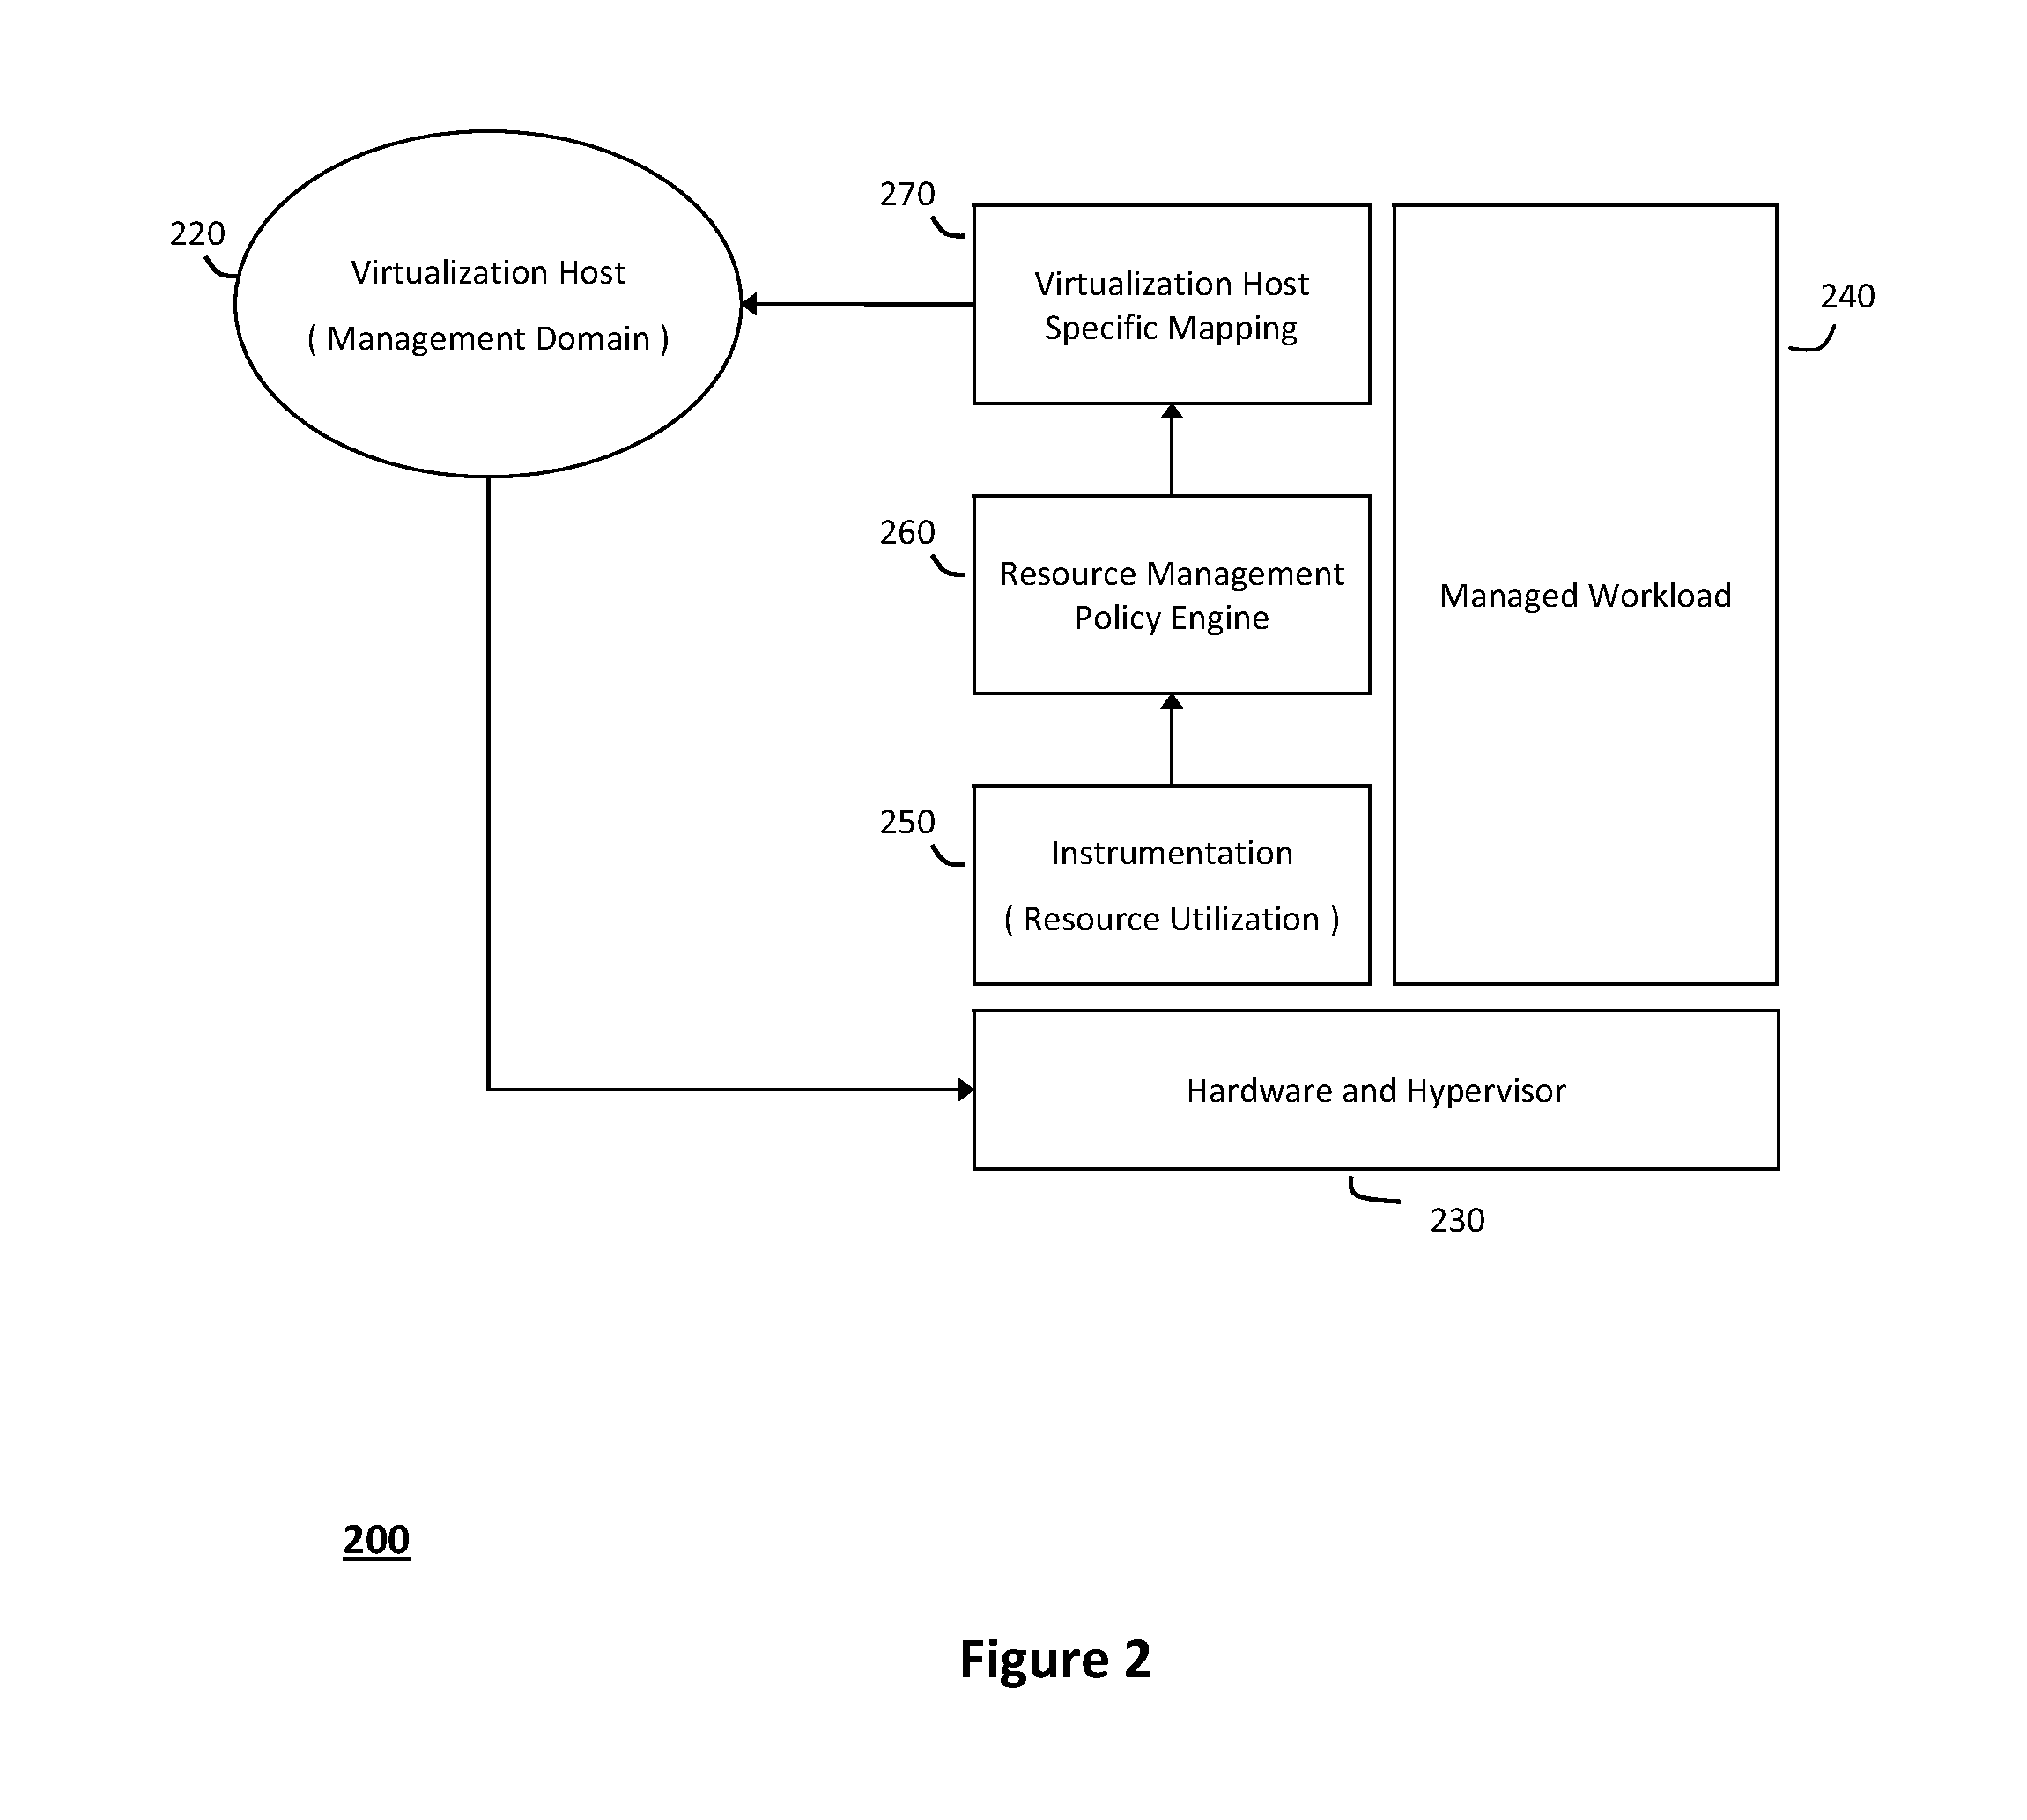 System and method for structuring self-provisioning workloads deployed in virtualized data centers